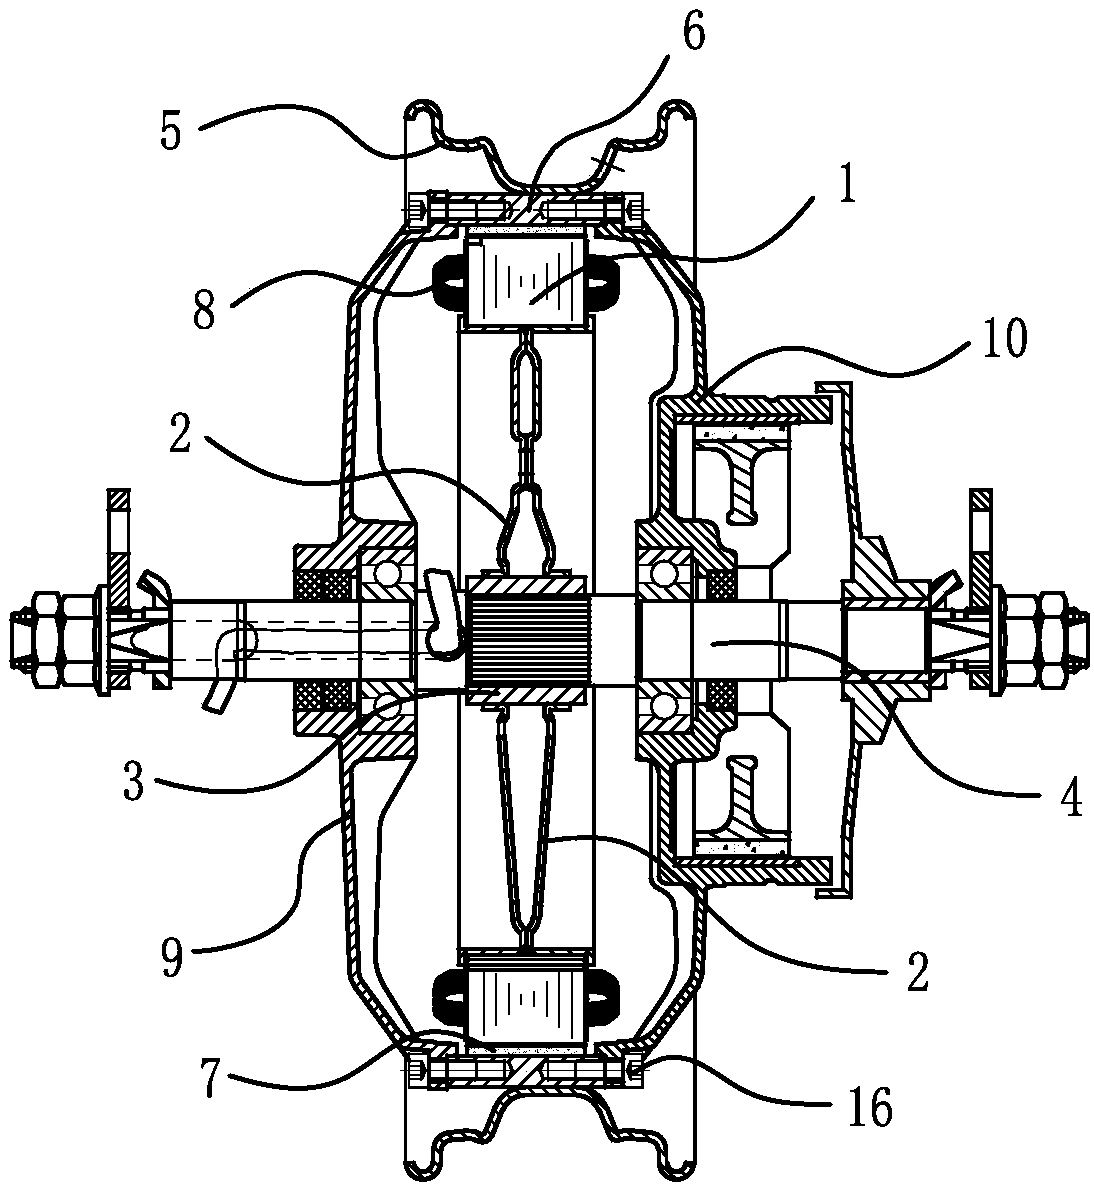 A stator for an electric wheel hub motor and a motor containing the stator